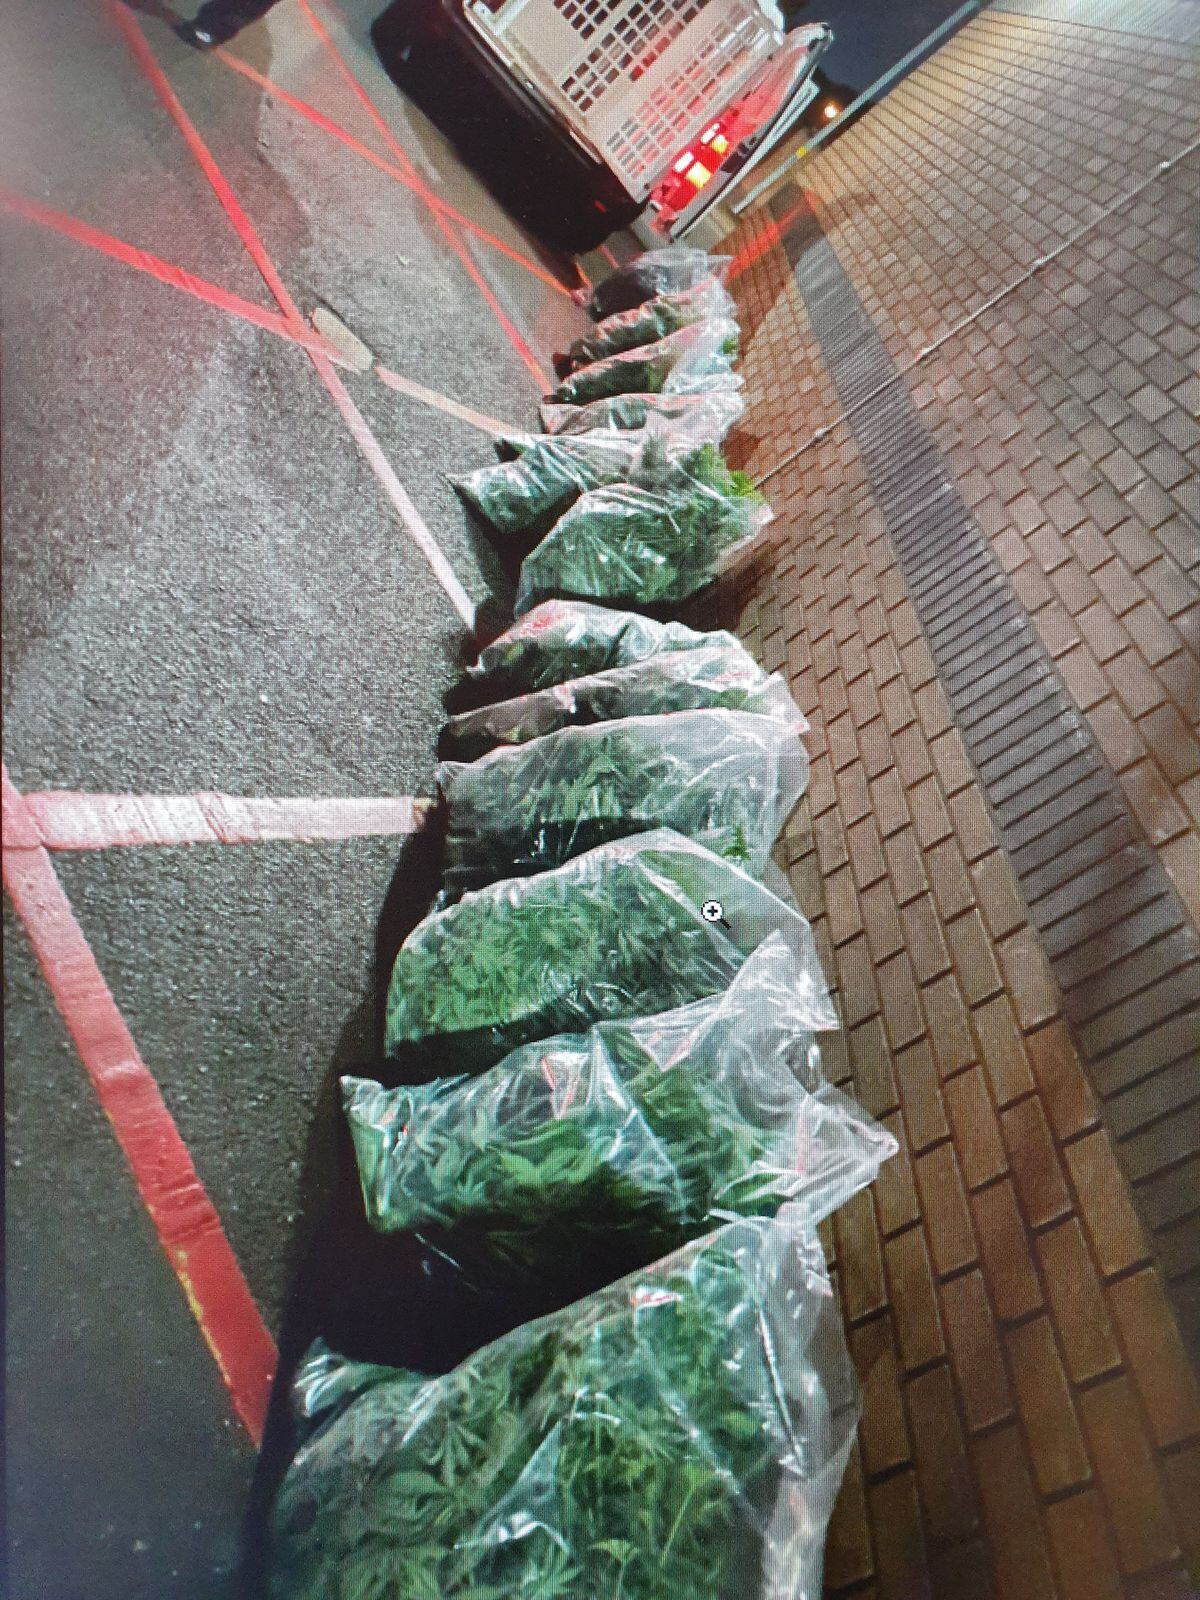 Police seized bags of the drug